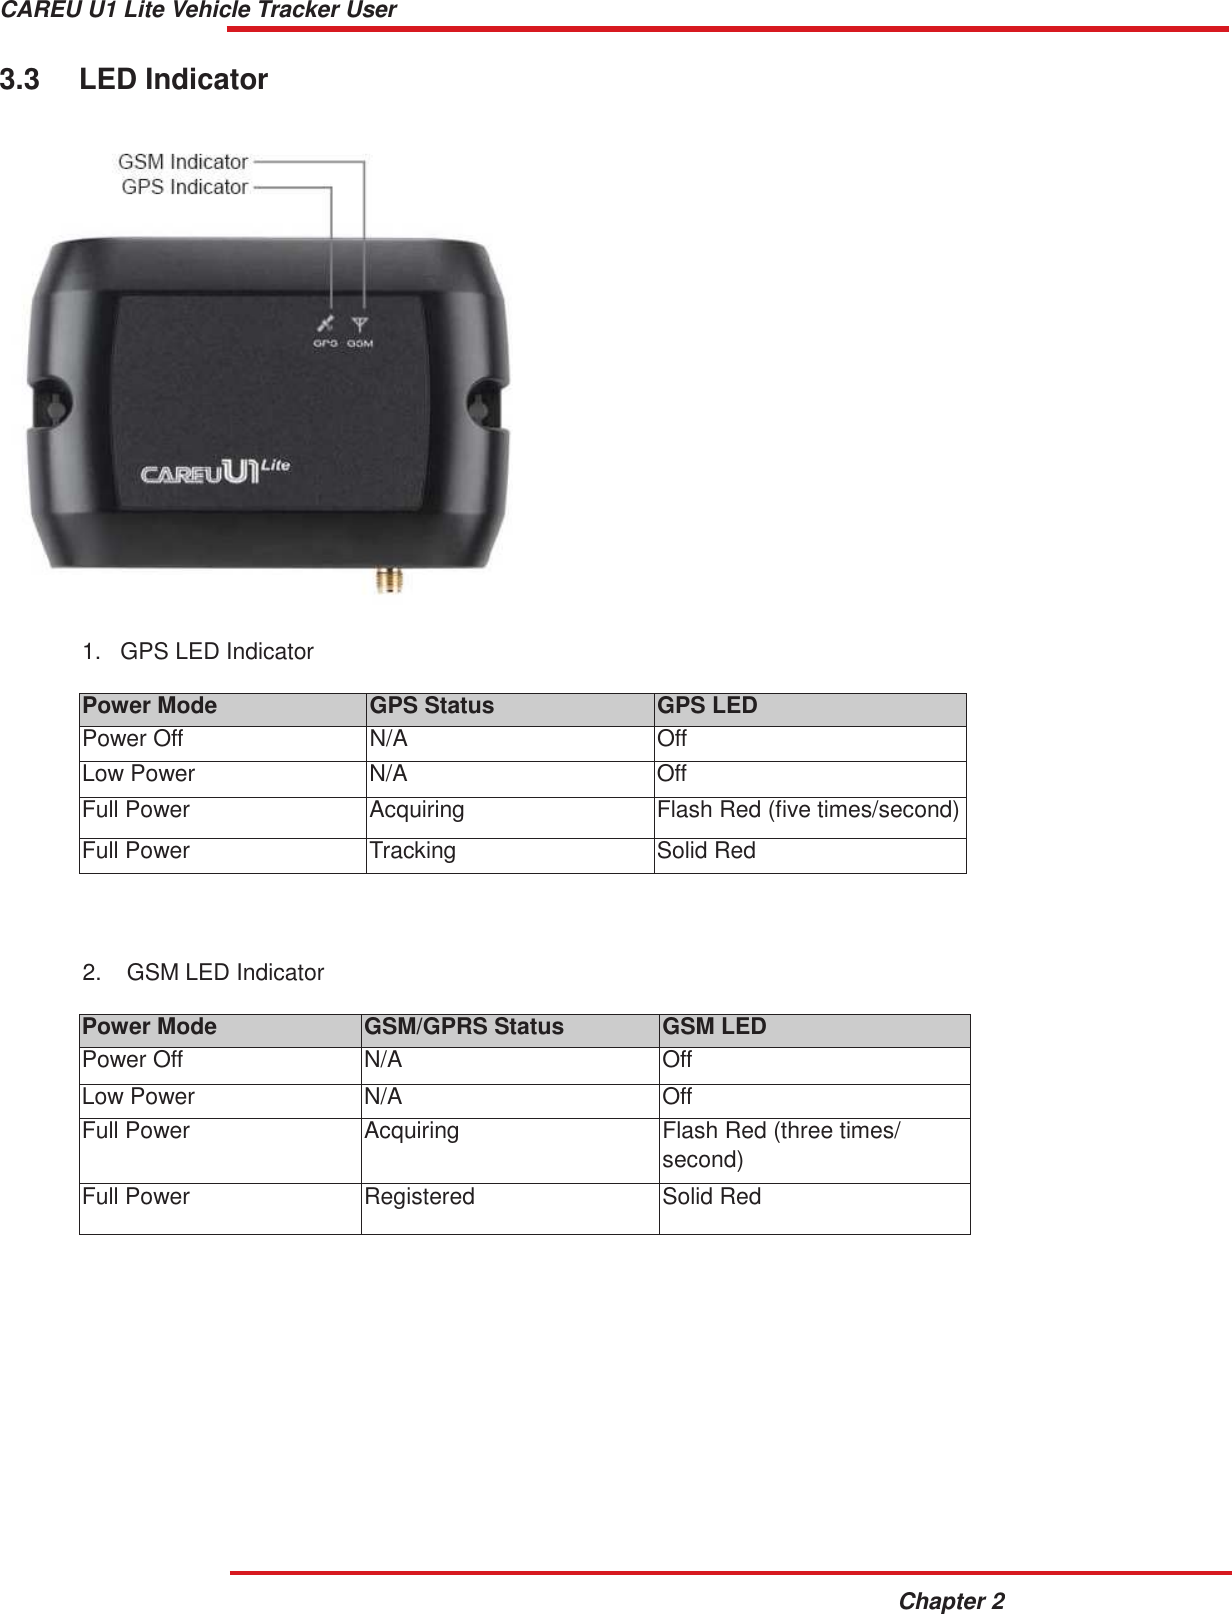 CAREU U1 Lite Vehicle Tracker User Guide Chapter 2    3.3  LED Indicator     1.   GPS LED Indicator  Power Mode GPS Status GPS LED Power Off N/A Off Low Power N/A Off Full Power Acquiring Flash Red (five times/second) Full Power Tracking Solid Red     2.  GSM LED Indicator  Power Mode GSM/GPRS Status GSM LED Power Off N/A Off Low Power N/A Off Full Power Acquiring Flash Red (three times/ second) Full Power Registered Solid Red 